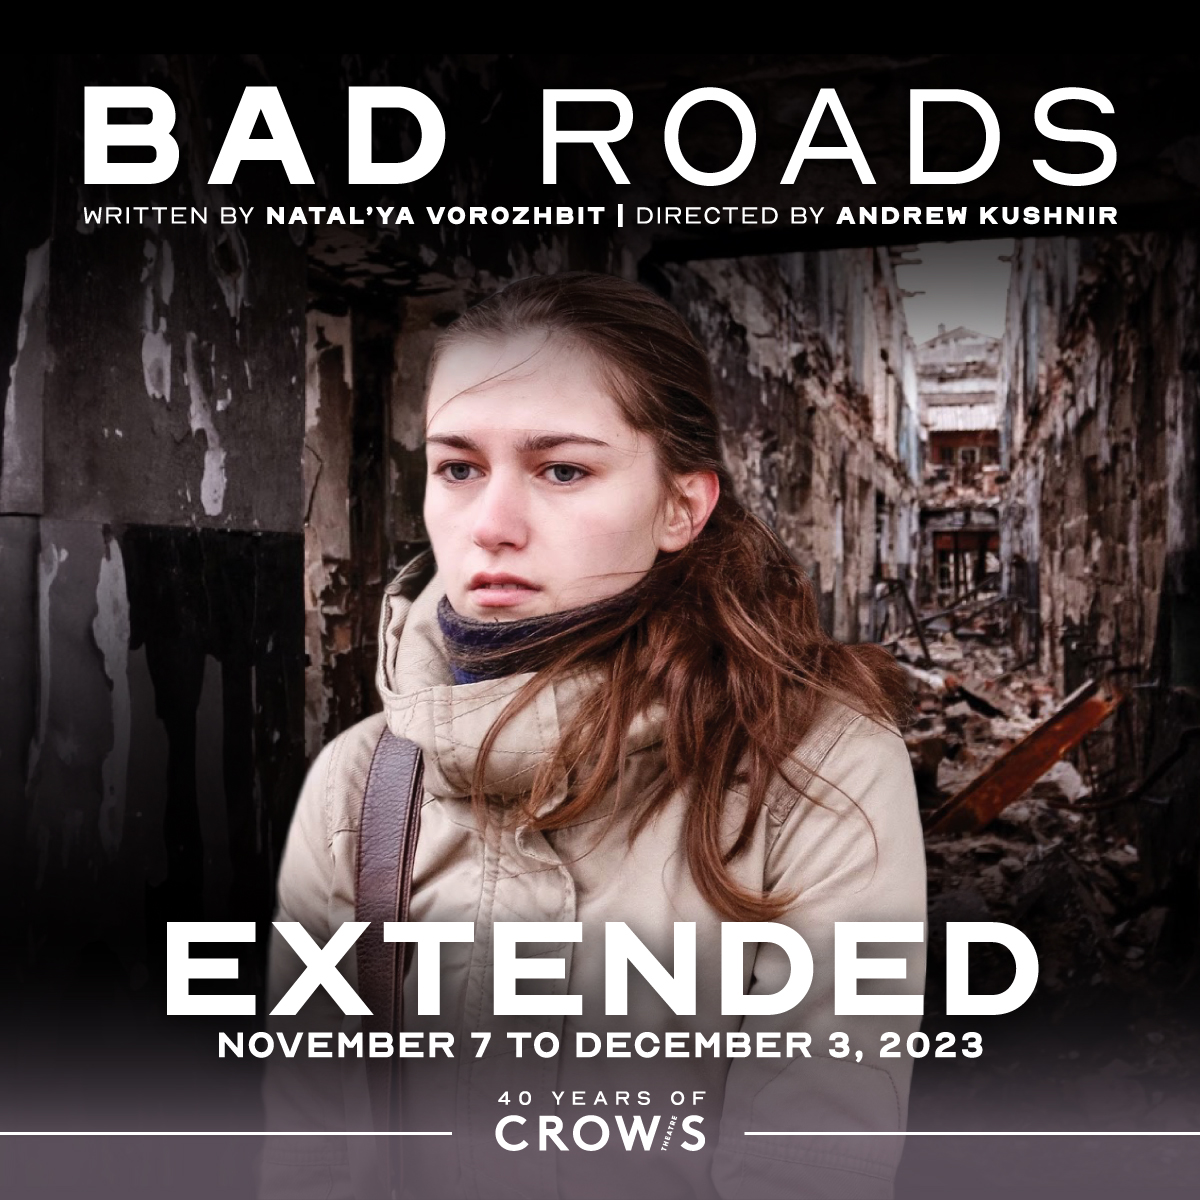 Due to incredible demand and a string of sold out shows, we're pleased to announce BAD ROADS will be held over an additional week! A new block of tickets from Nov 28 - Dec 3 is now available through our website. 🎟 Tickets and show info: ow.ly/o6rL50Q863W